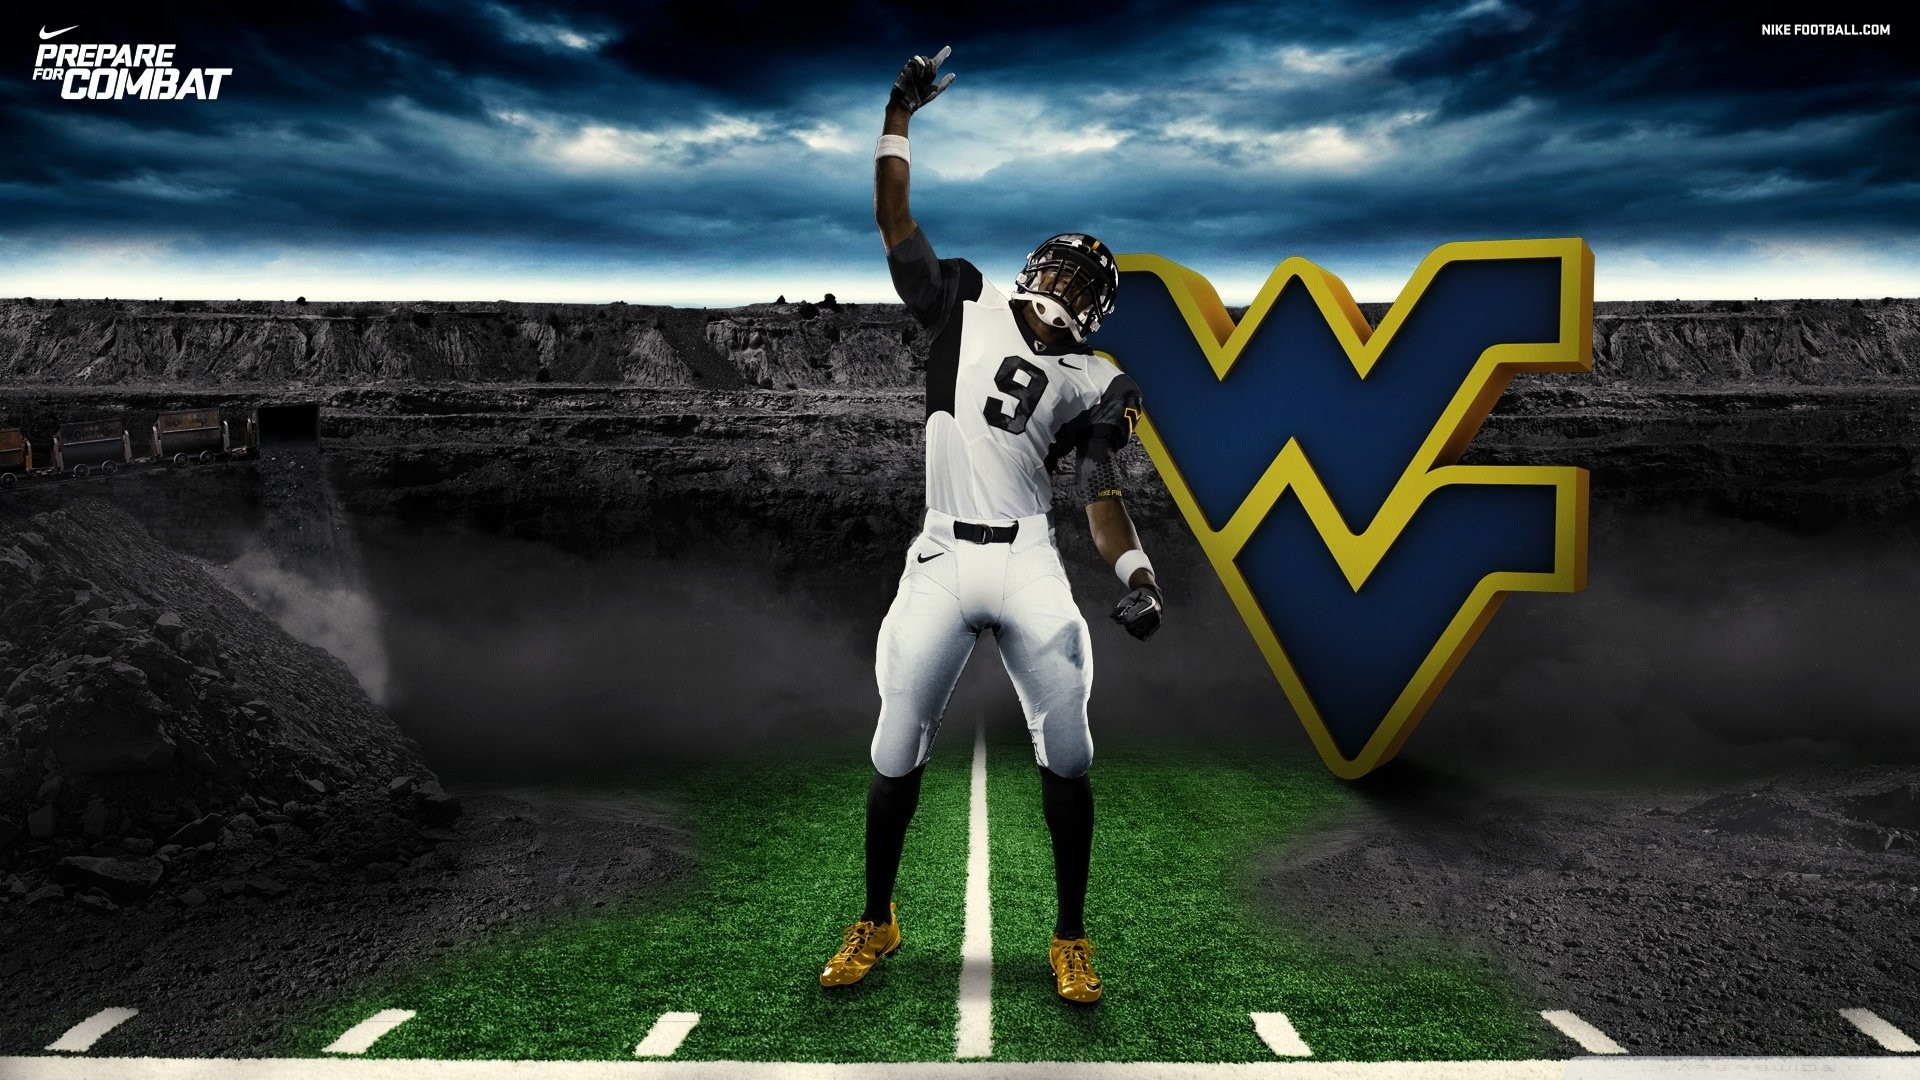 1920x1080 ... backgrounds for west virginia camo background www 8backgrounds com ...